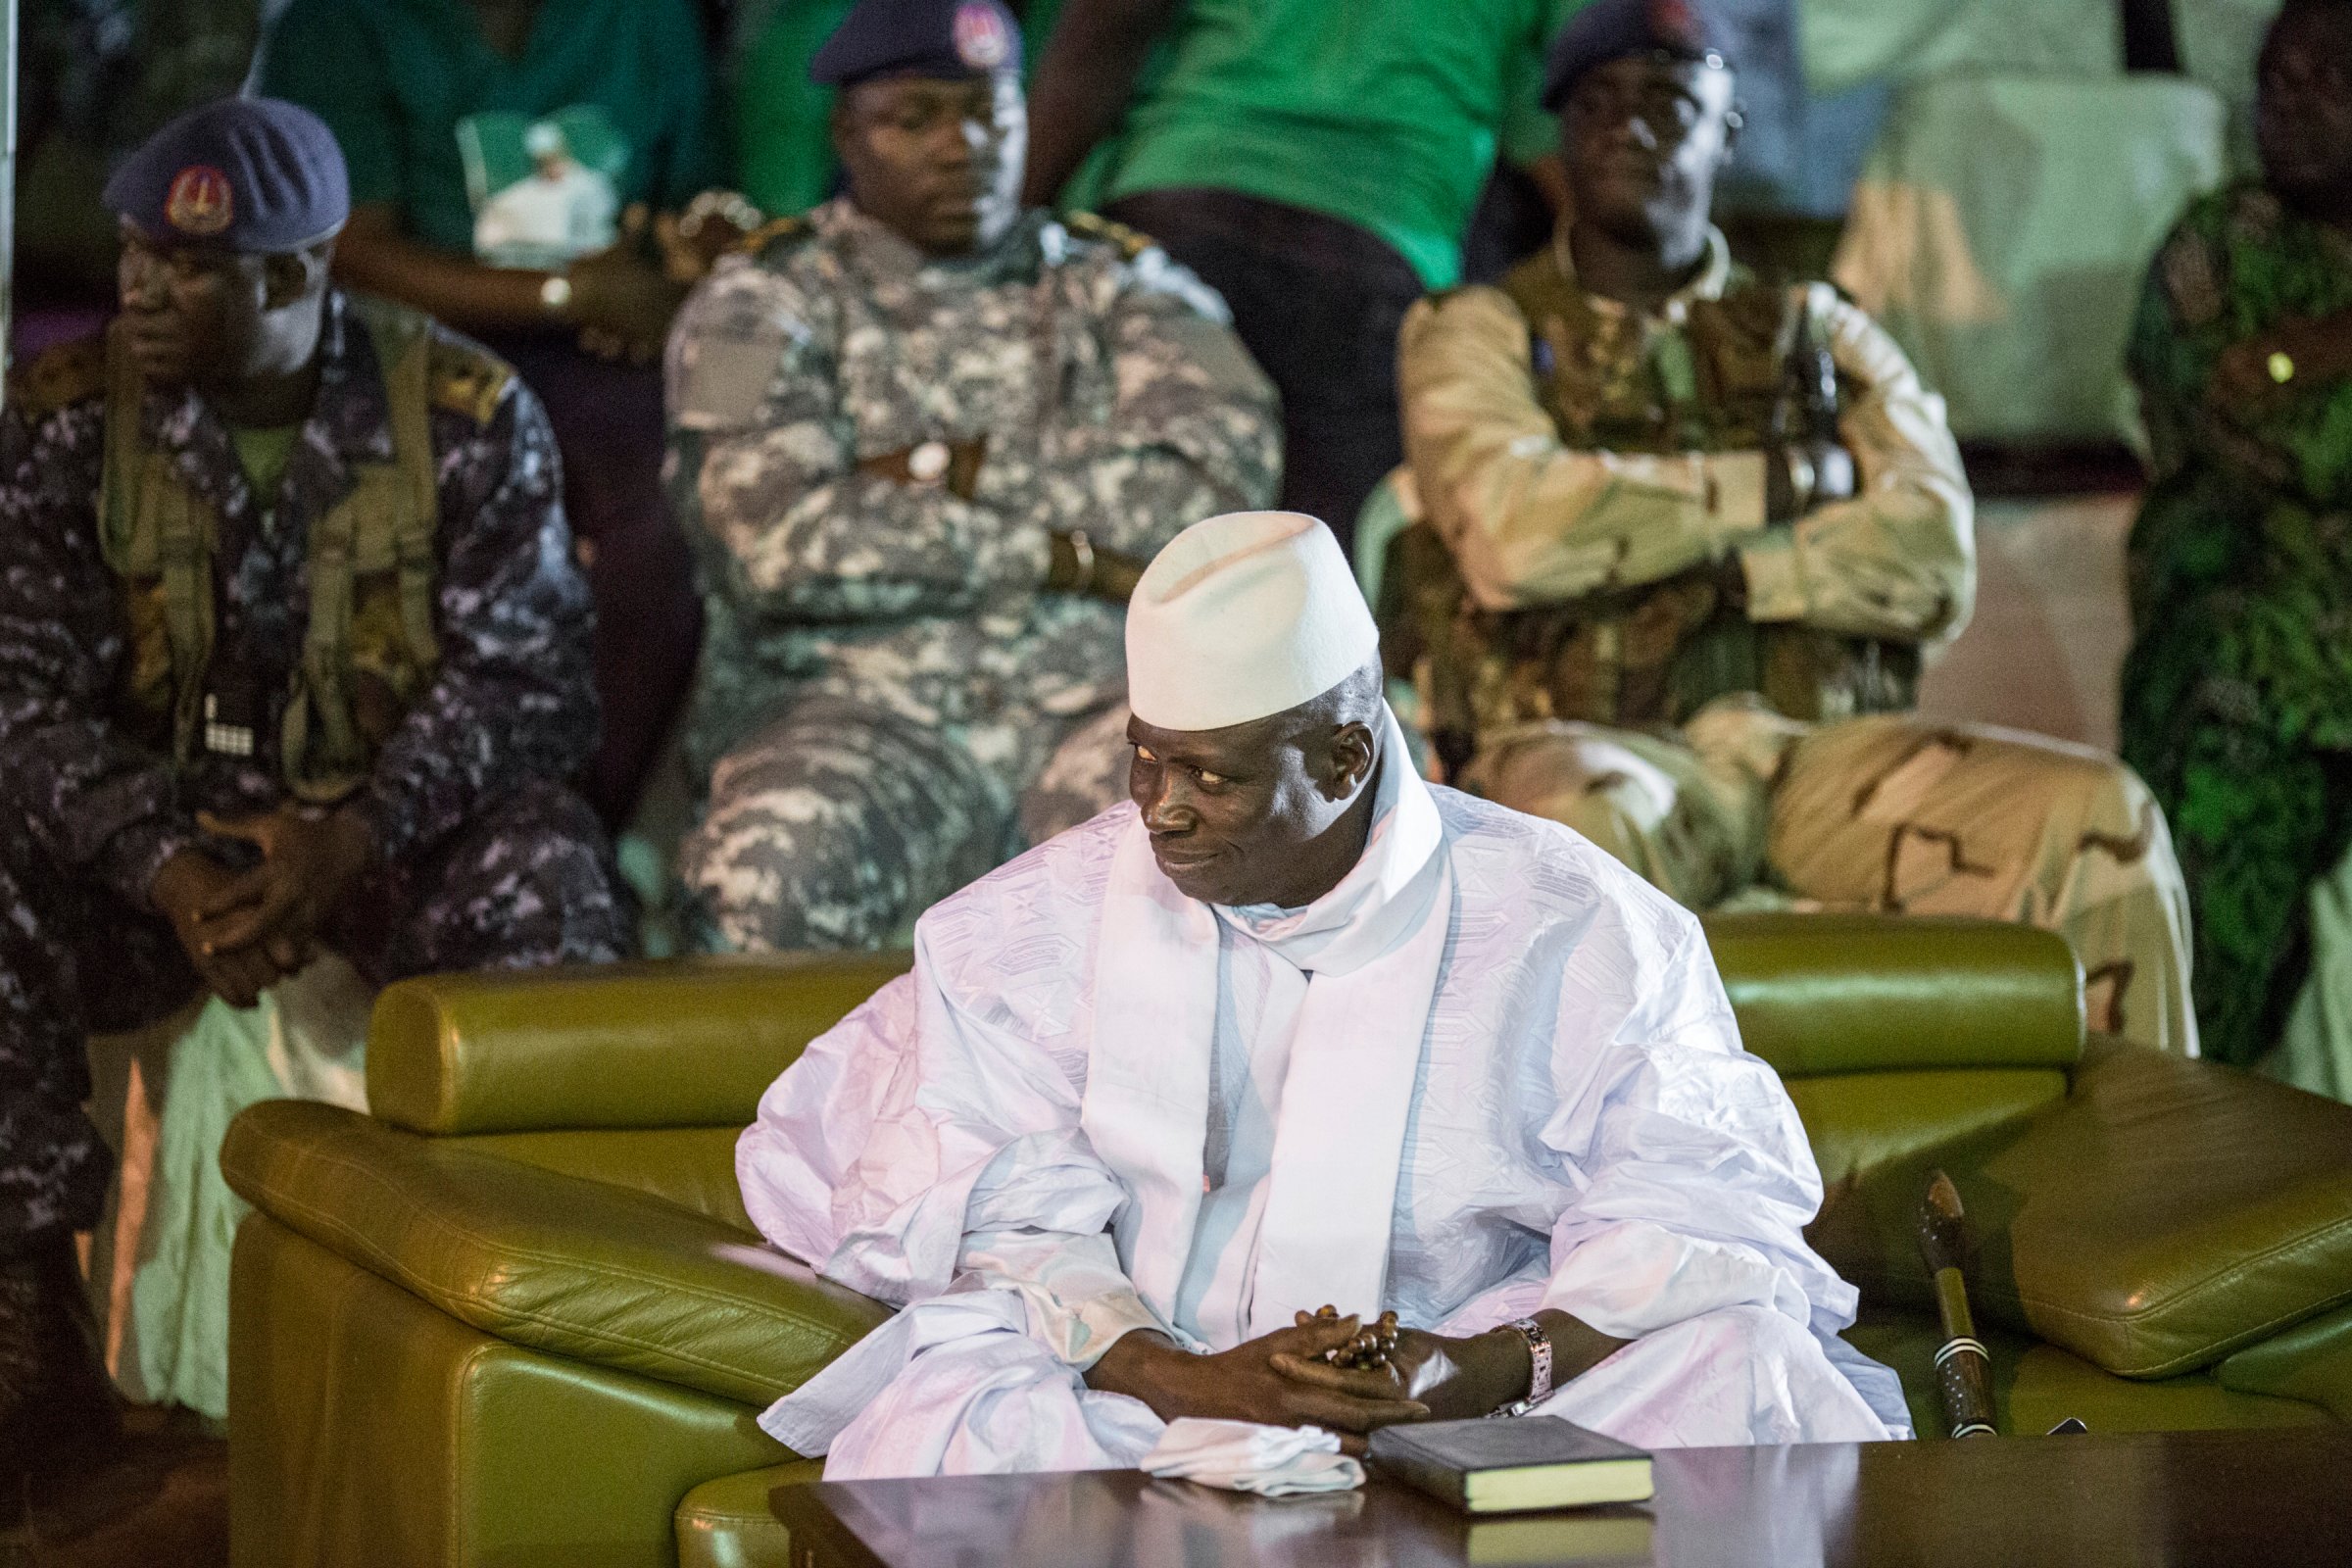 Incumbent Gambian President Yahya Jammeh looks on in Banjul on November 29, 2016, during the closing rally of the electoral campaign of the Alliance for Patriotic Reorientation and Construction (APRC).